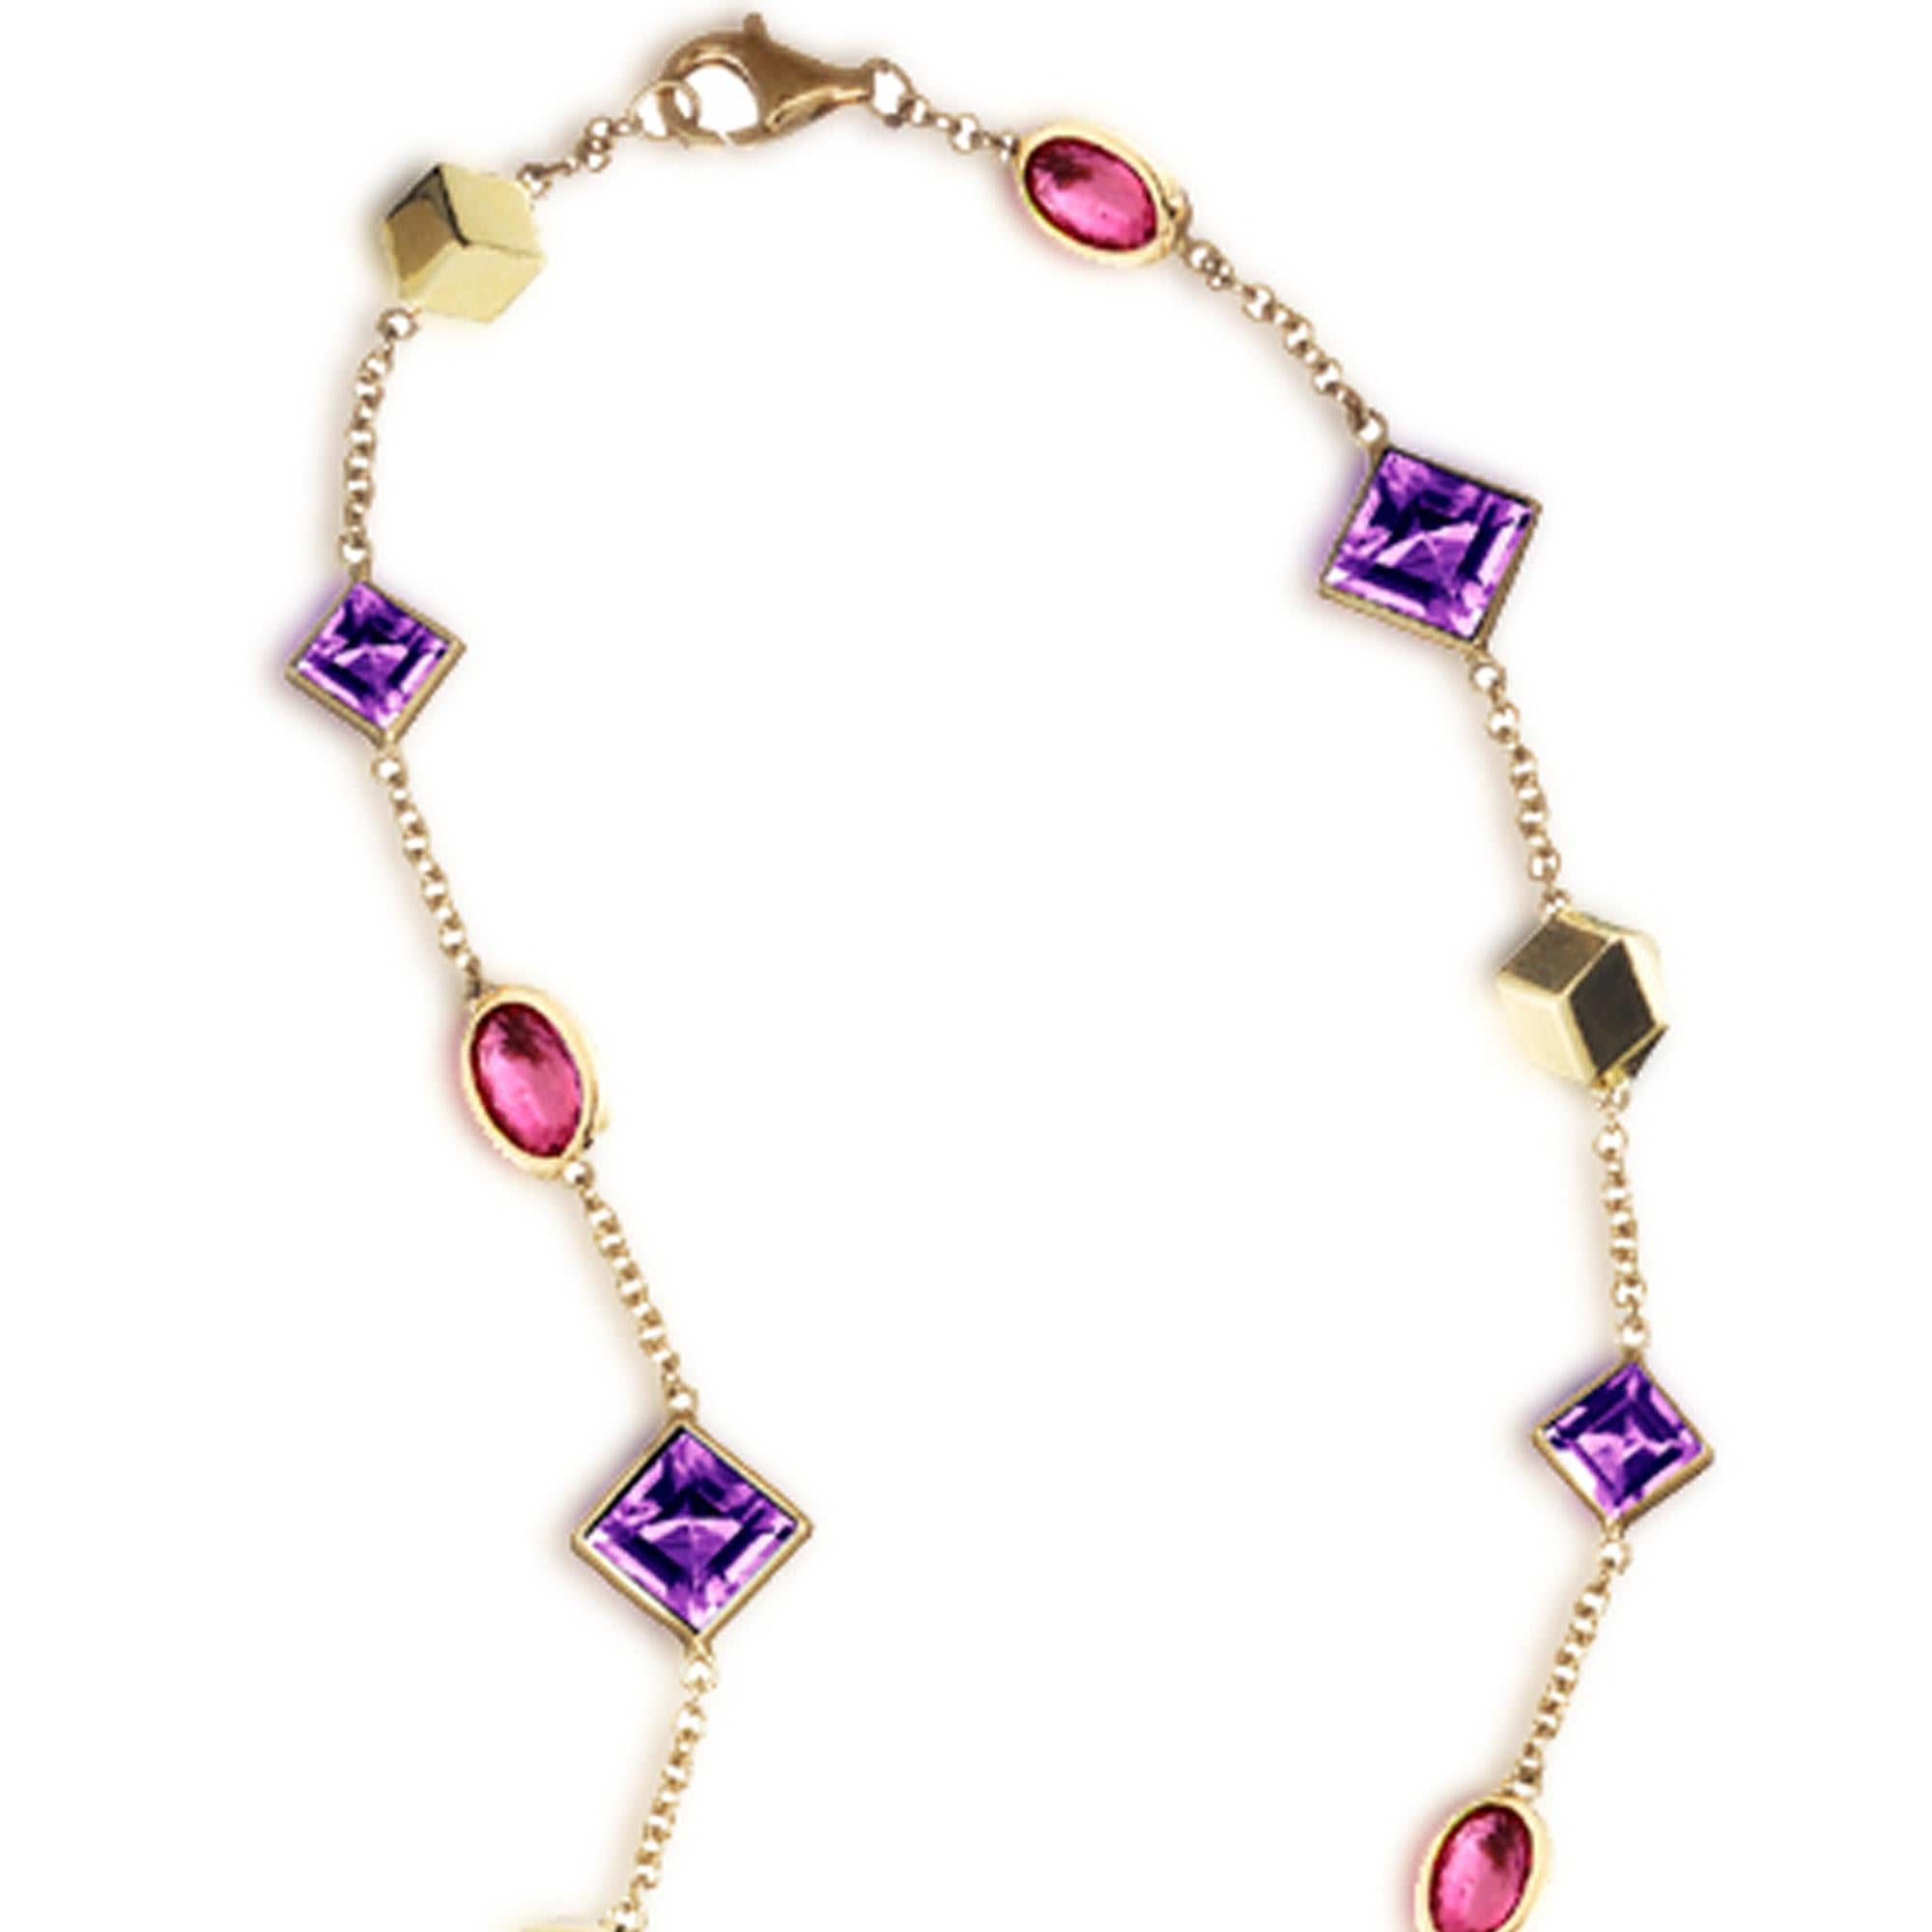 Emerald Cut 18 Karat Yellow Gold Florentine Necklace with Amethyst and Rubies